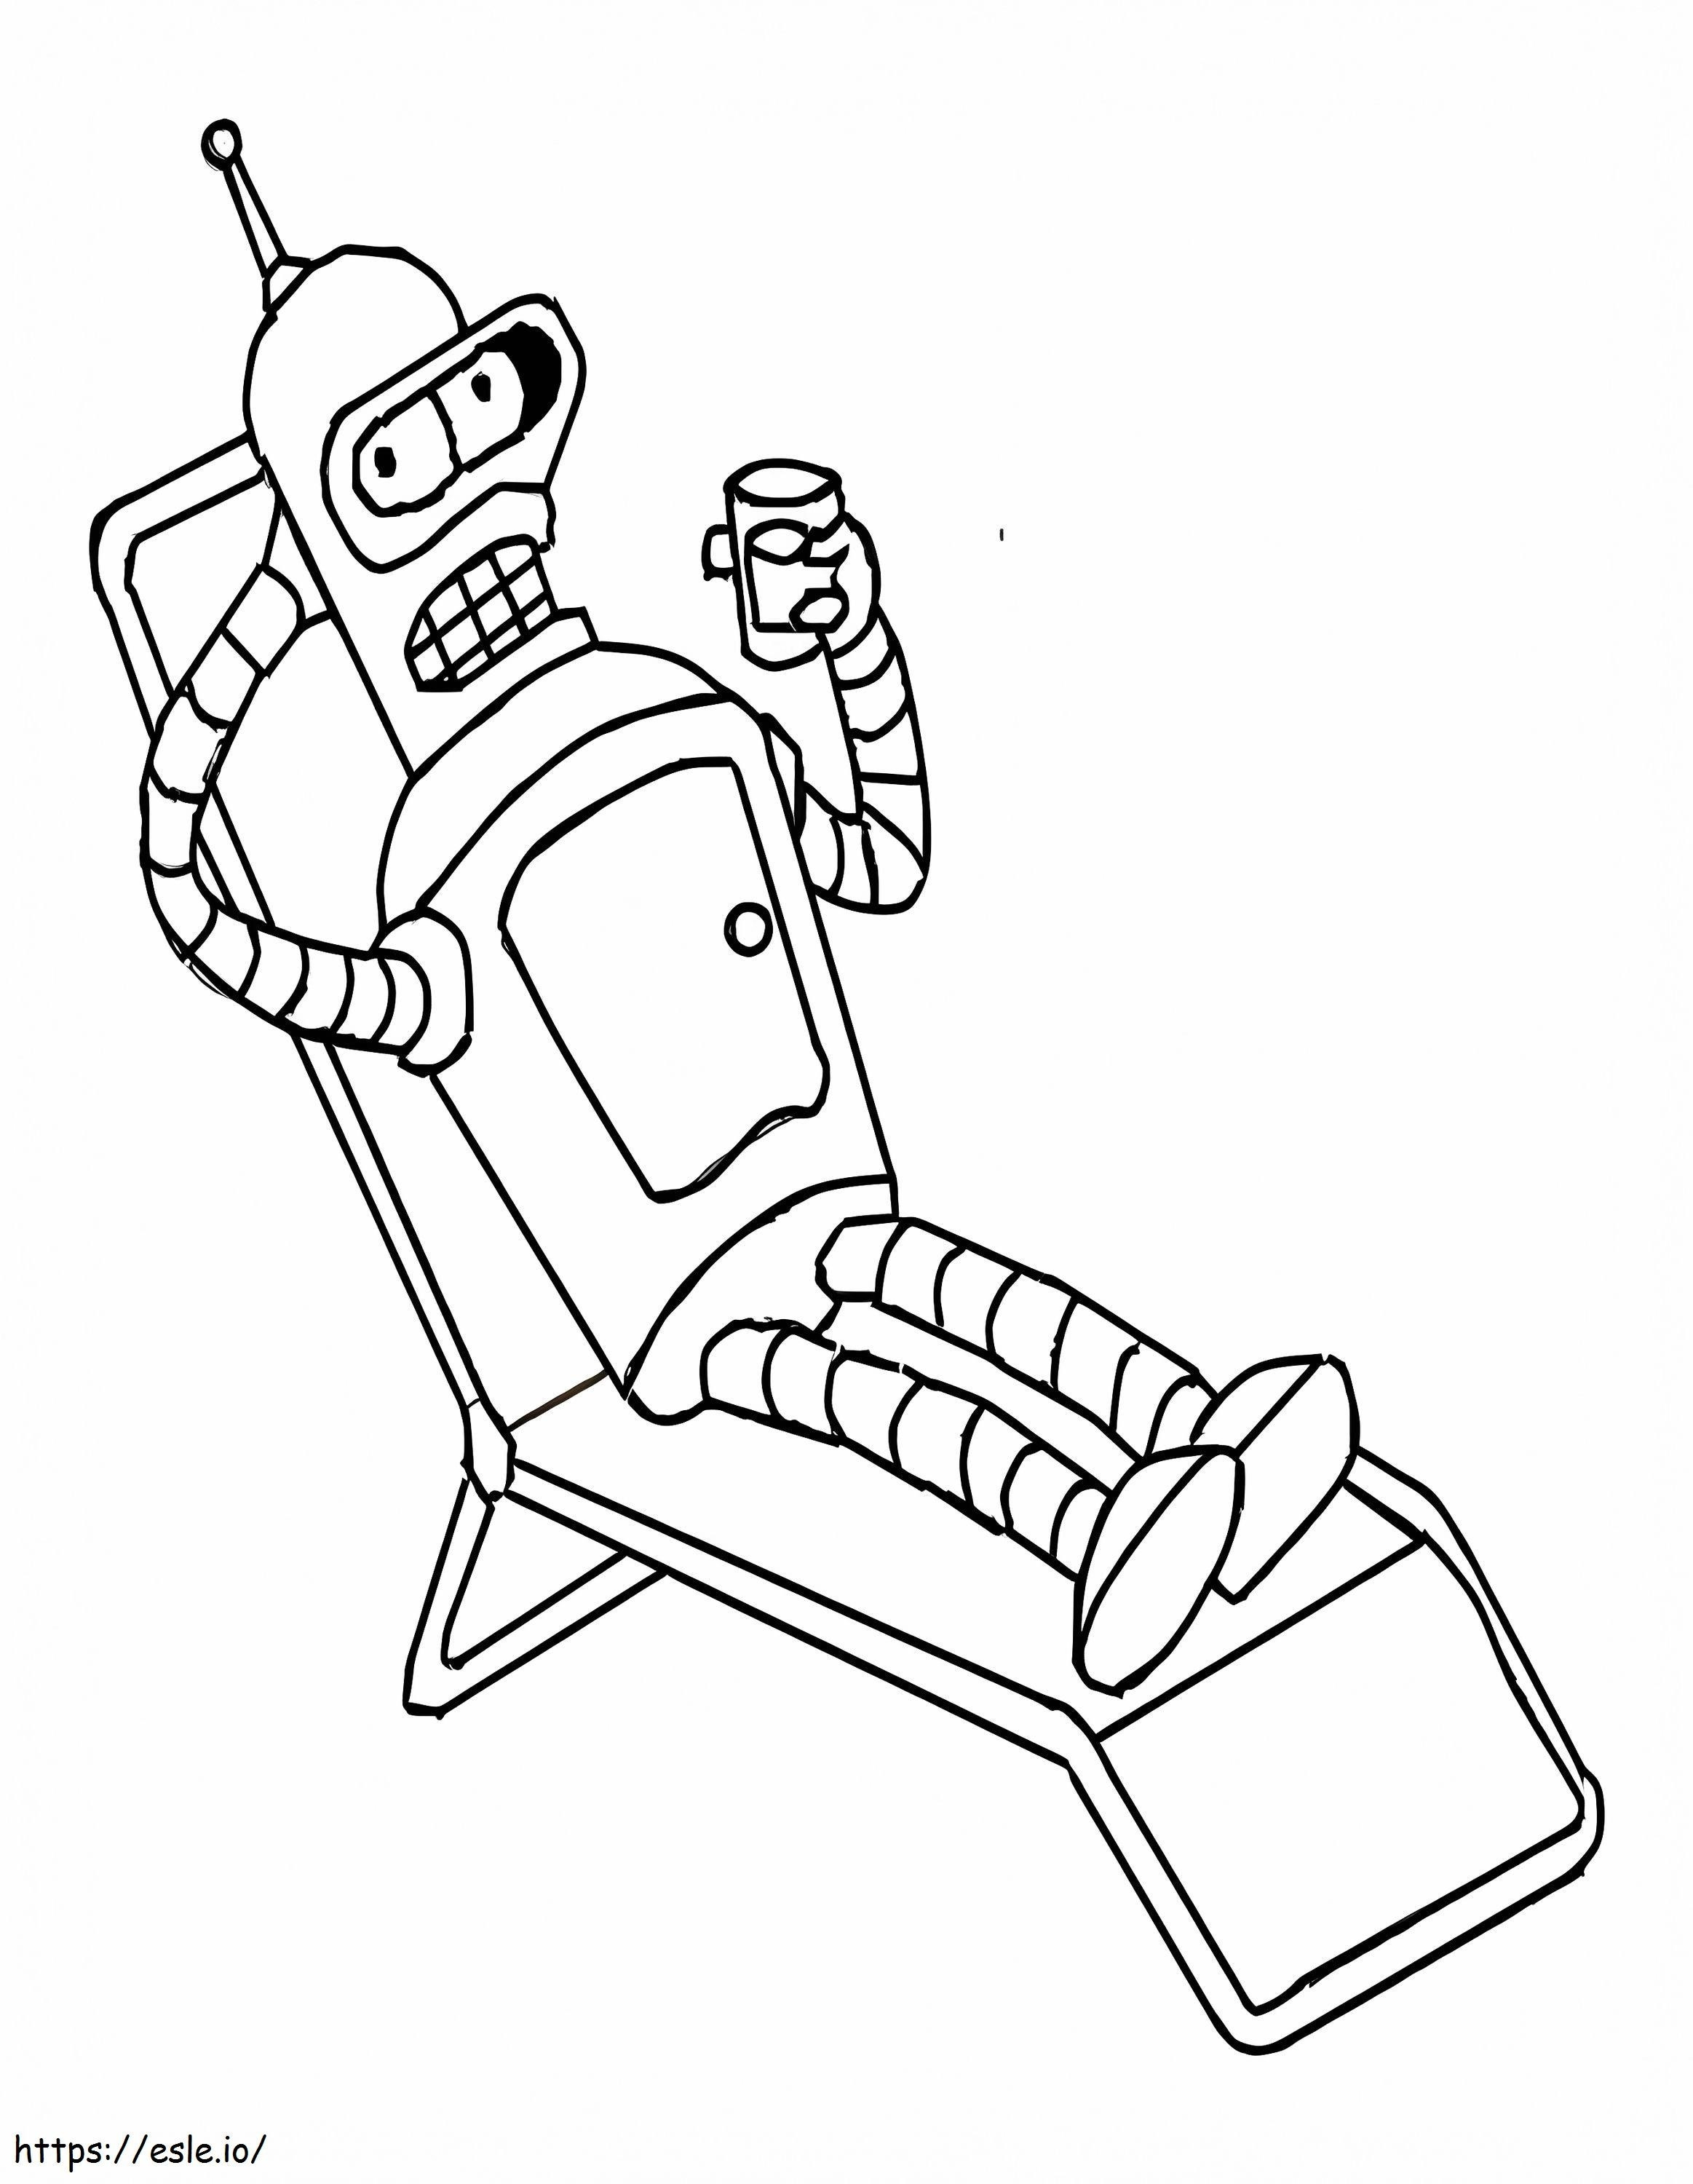 Bender Relaxing coloring page